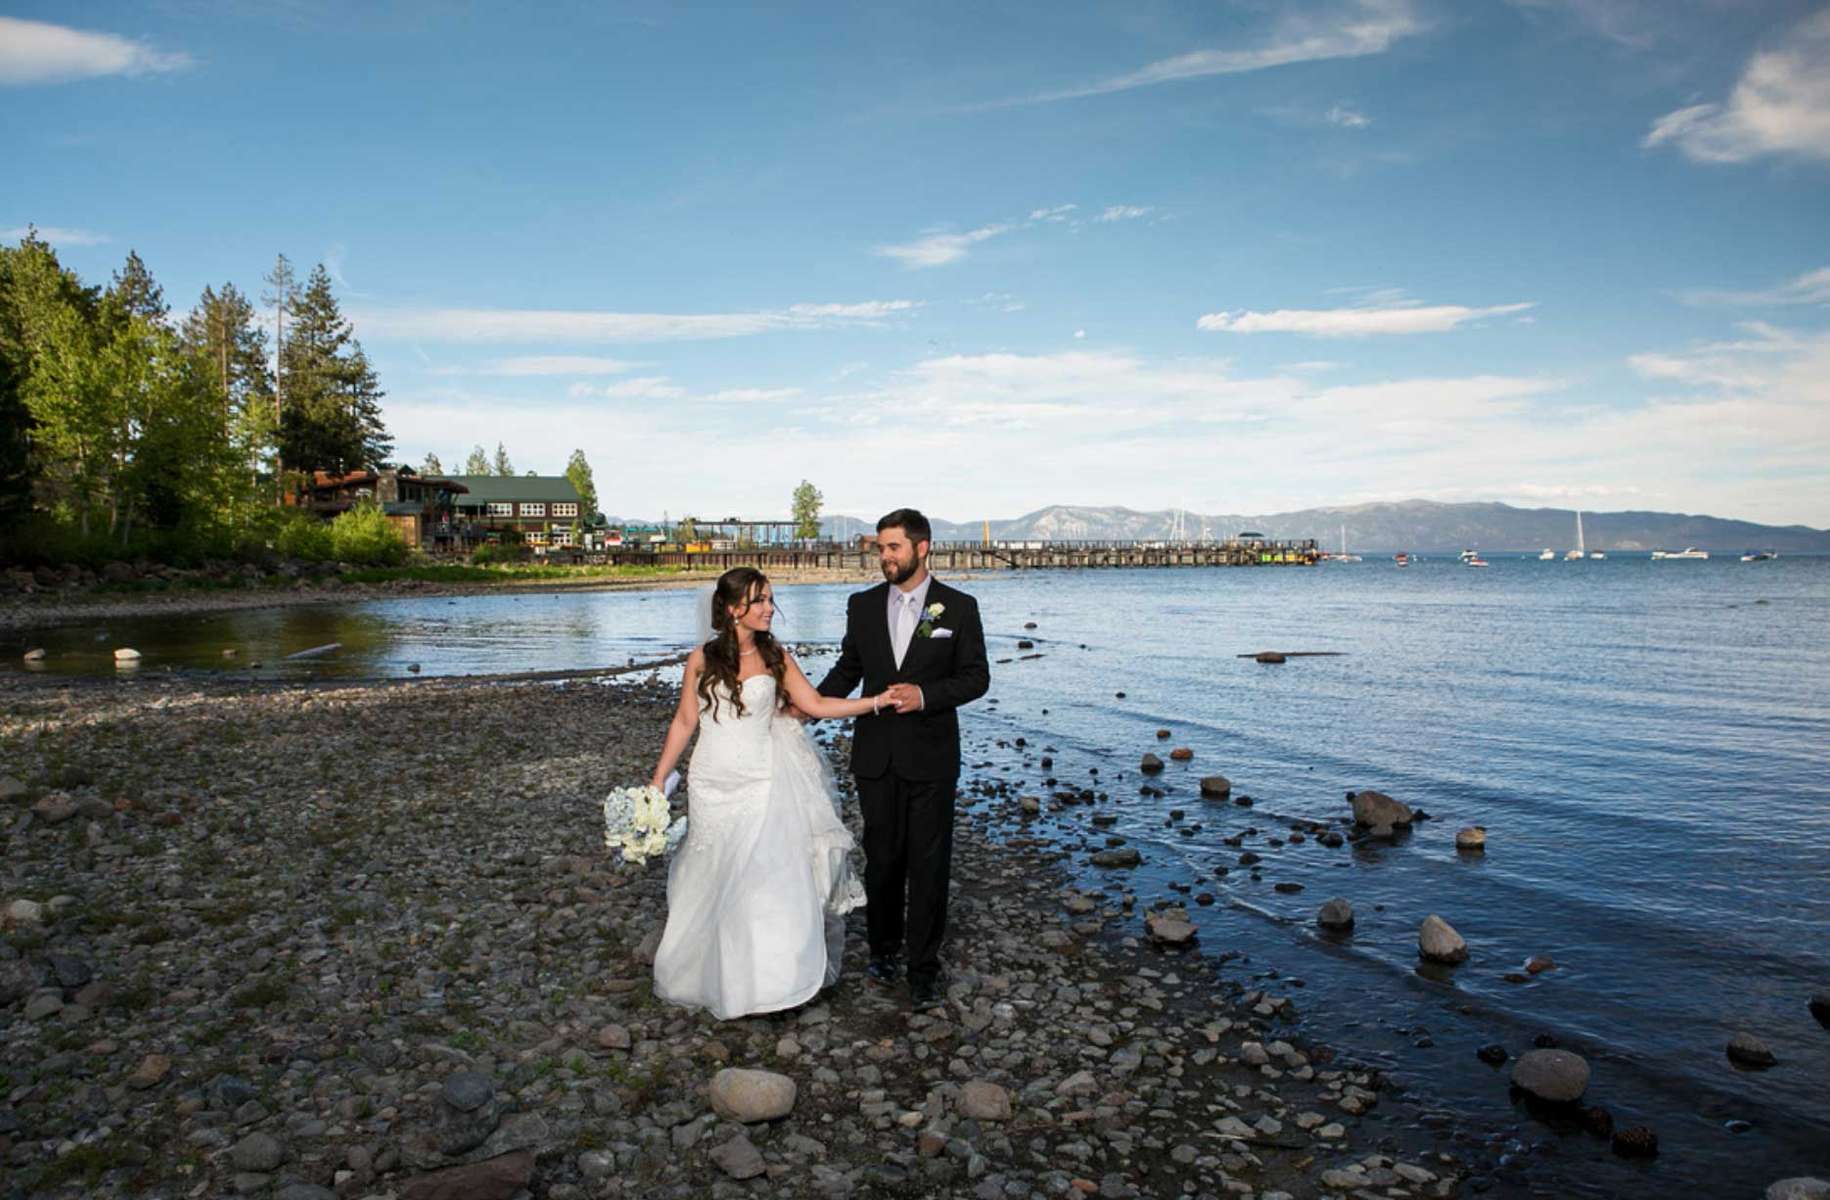 Nestled amidst the breathtaking beauty of Lake Tahoe, Sarah and John's wedding was nothing short of a dream come true. The serene, crystal-clear waters of the lake provided a stunning backdrop for their special day, reflecting the love and commitment they shared. Surrounded by towering pine trees and the majestic Sierra Nevada mountains, their ceremony was a picture-perfect moment that blended nature's grandeur with their heartfelt vows. As the sun dipped behind the mountains, casting a warm, golden glow over the festivities, friends and family gathered to celebrate this union in a rustic lakeside venue. From the intimate ceremony by the water's edge to the lively reception under the stars, it was a day filled with love, laughter, and the unparalleled magic of Lake Tahoe.